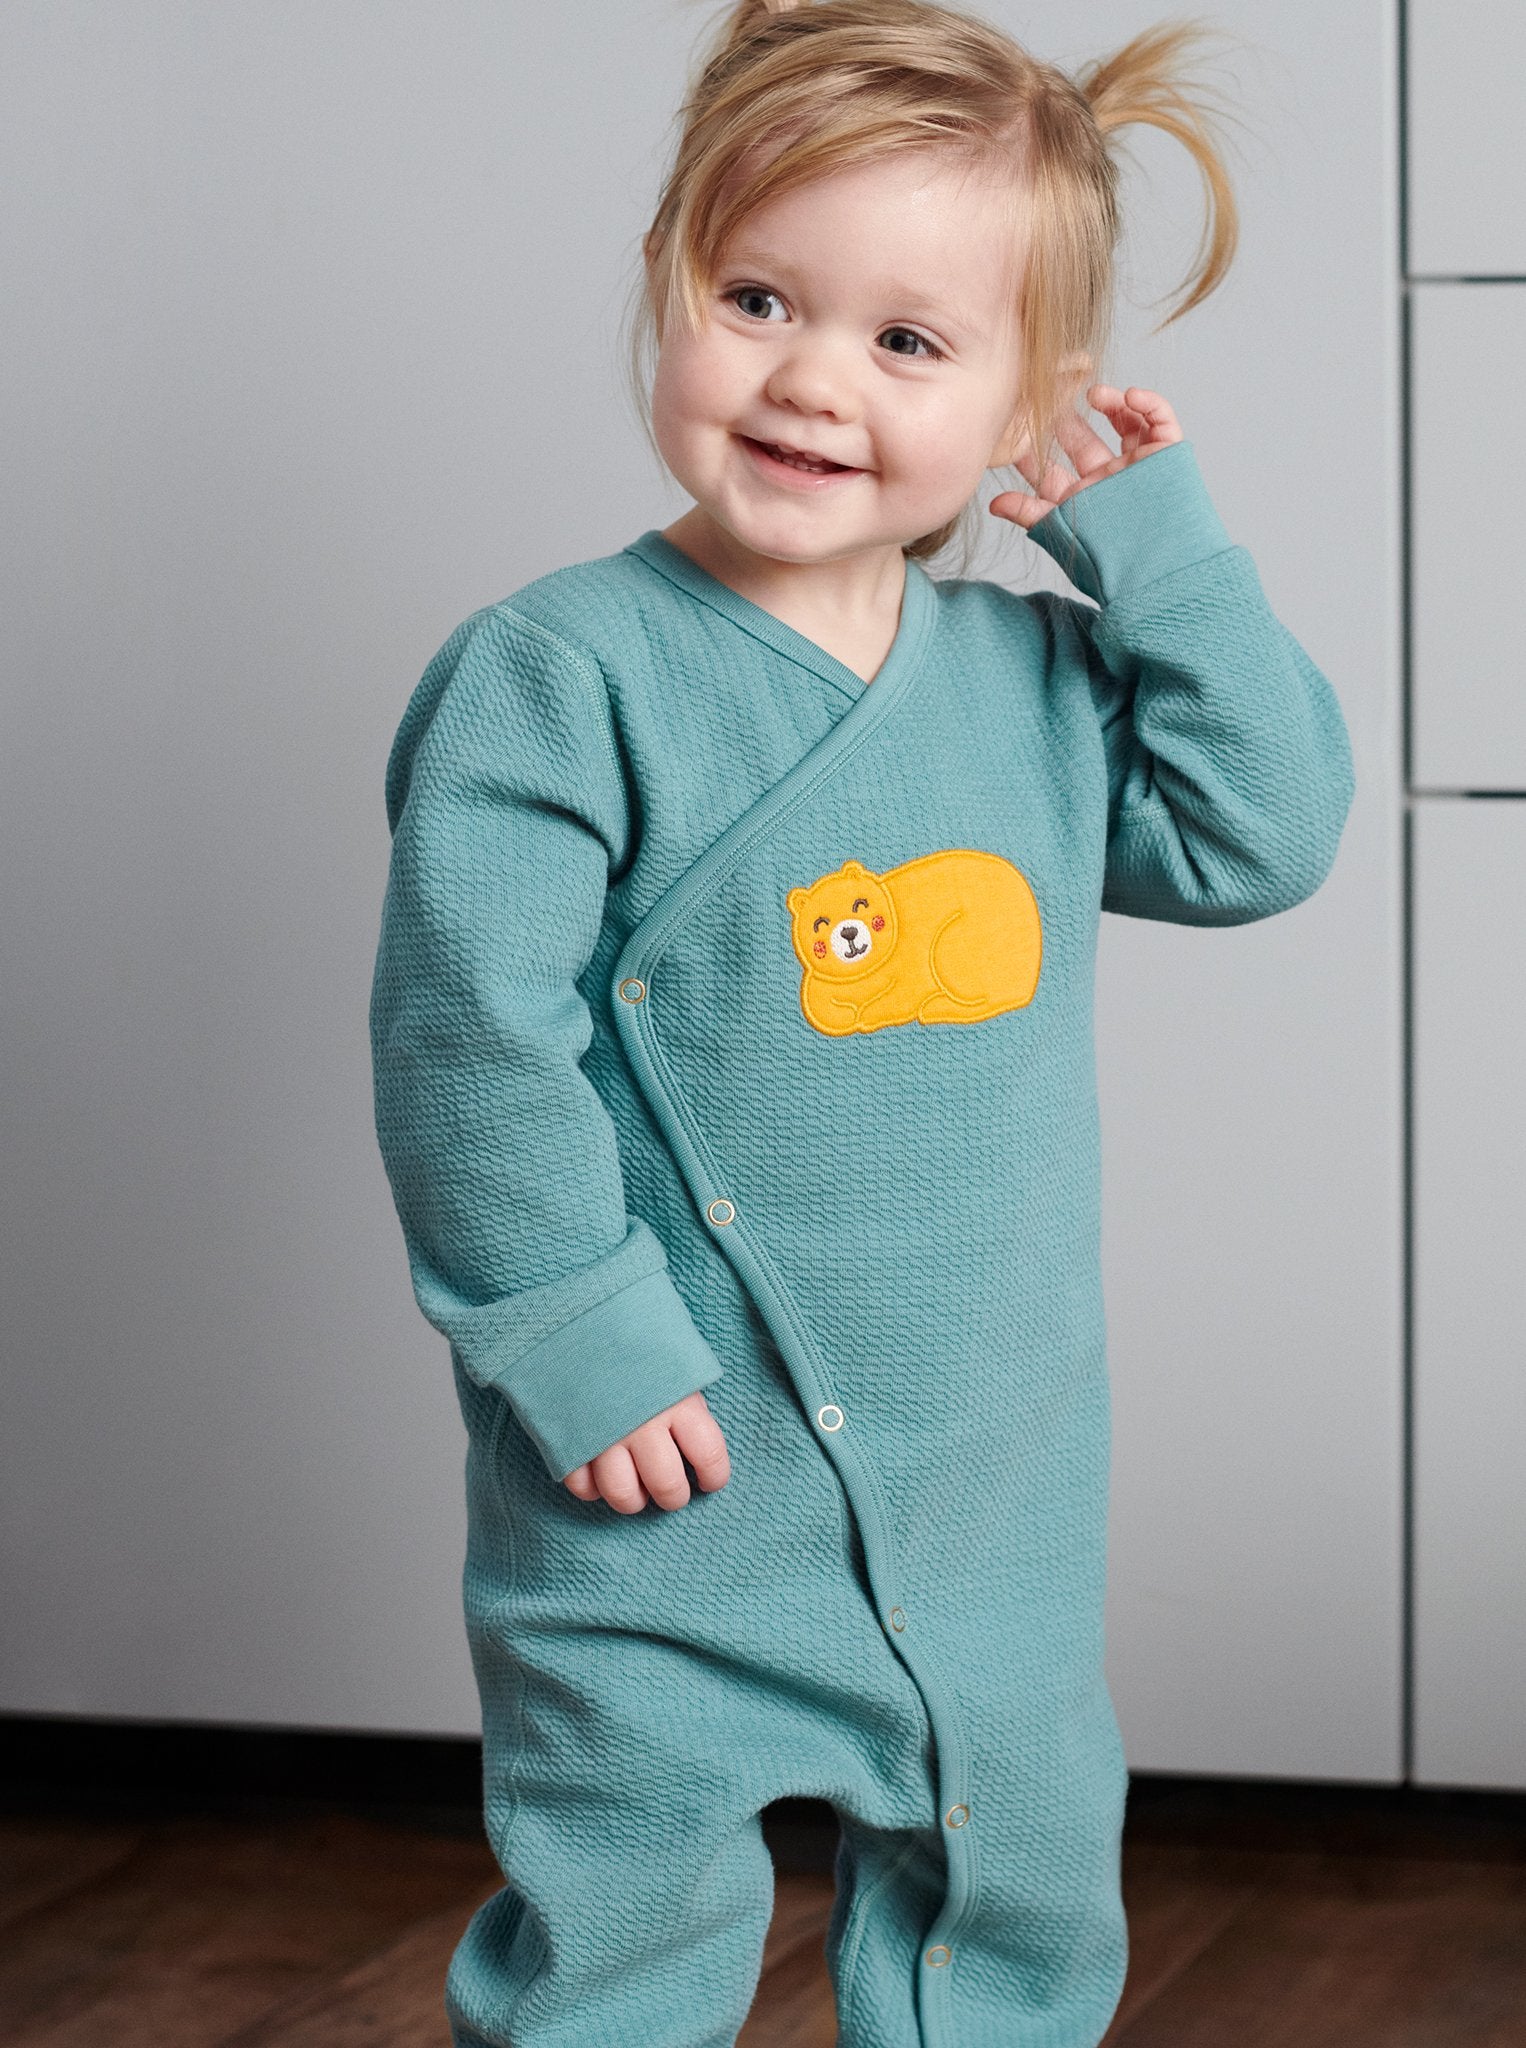 Toddler wearing wraparound onesie for newborn babies in GOTS organic cotton with adorable sleeping bear applique. With full length popper fastenings for speedy changes. Quality ribbed trim for added comfort.